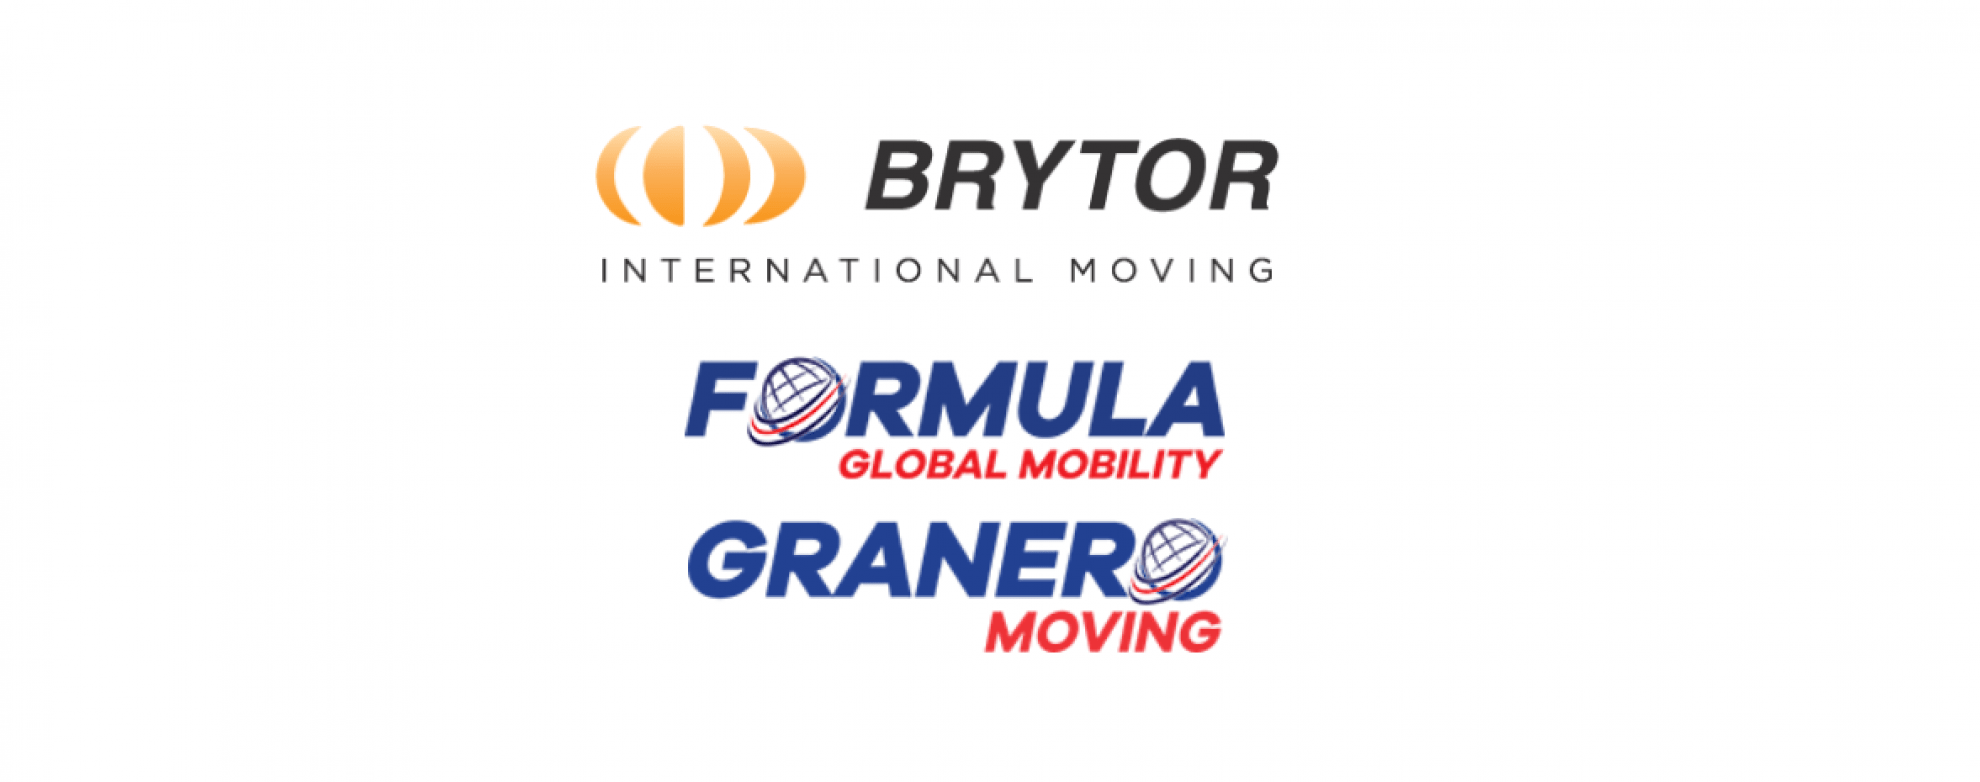 Brytor International Moving acquires Formula Global Mobility and Granero Moving